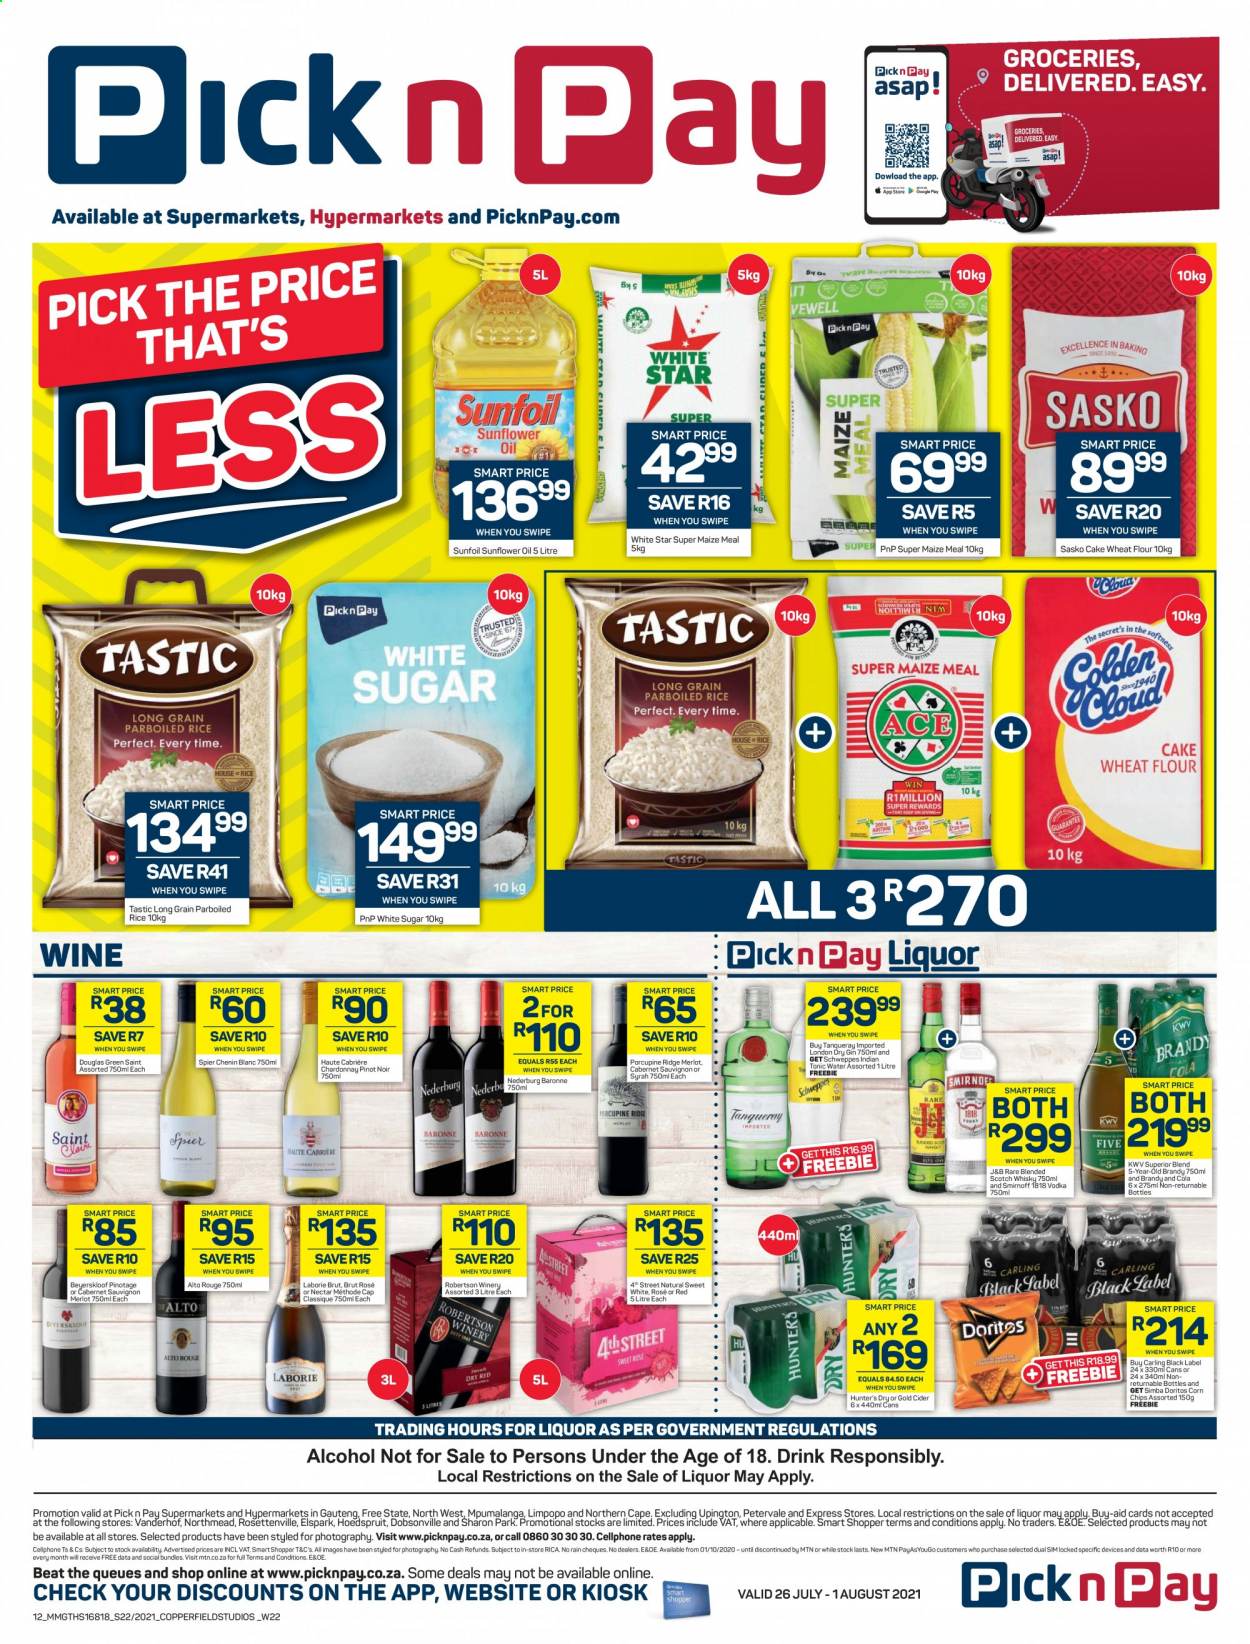 Pick n Pay specials - 07.26.2021 - 08.01.2021. 